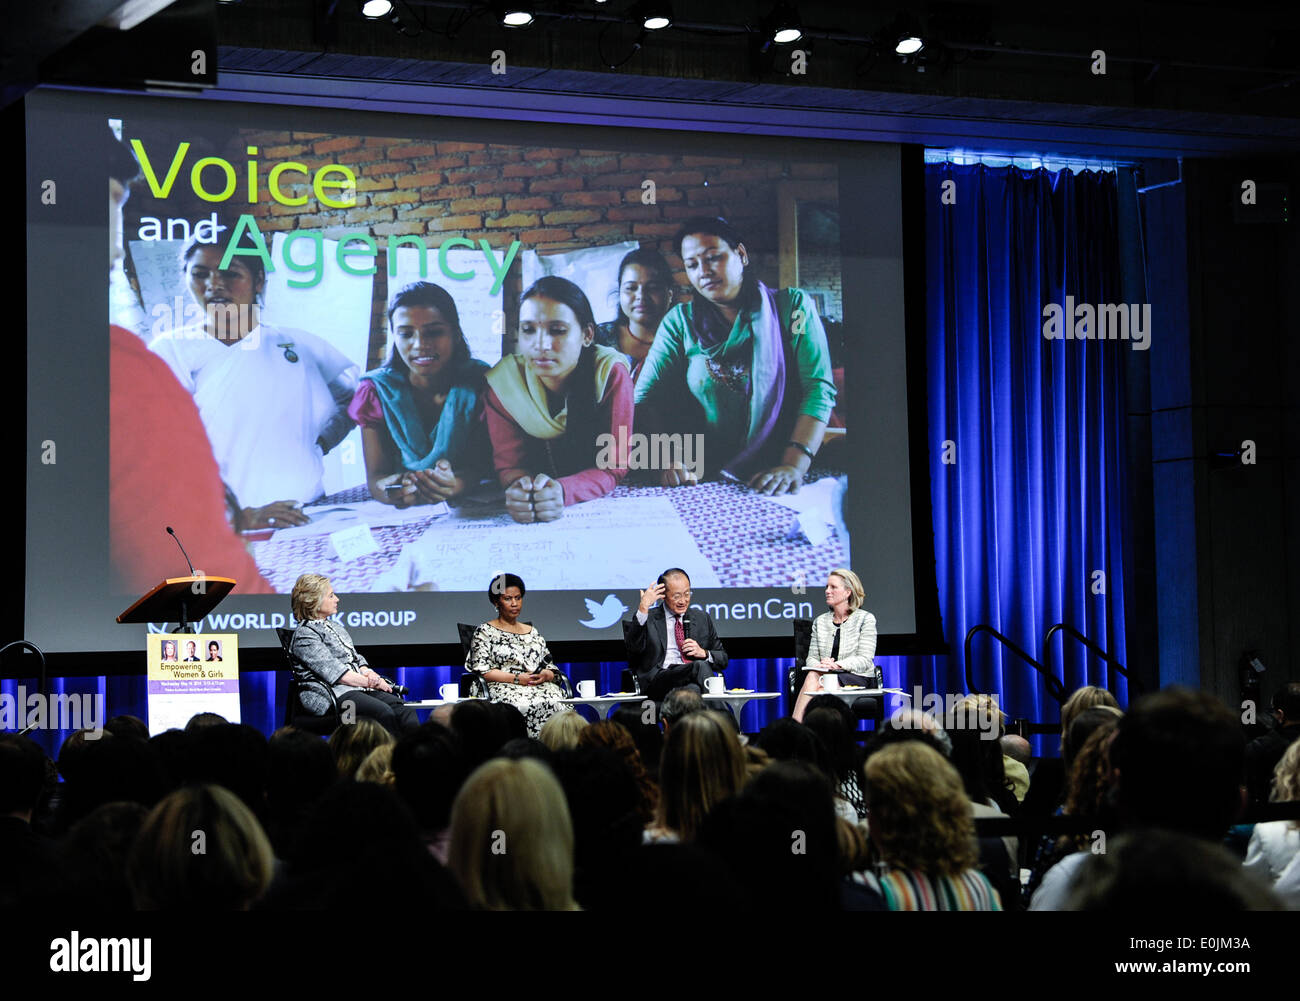 Washington DC, USA. 14th May, 2014. World Bank Group President Jim Yong Kim (2nd R) speaks at the launch ceremony of World Bank Group's new report 'Voice and Agency: Empowering Women and Girls for Shared Prosperity finds' in Washington, DC, capital of the United States, May 14, 2014. Girls with little or no education are far more likely to be married as children, suffer domestic violence, live in poverty, and lack a say over household spending or their own health care than better-educated peers, according to the new report by the World Bank Group on Wednesday. Credit:  Xinhua/Alamy Live News Stock Photo